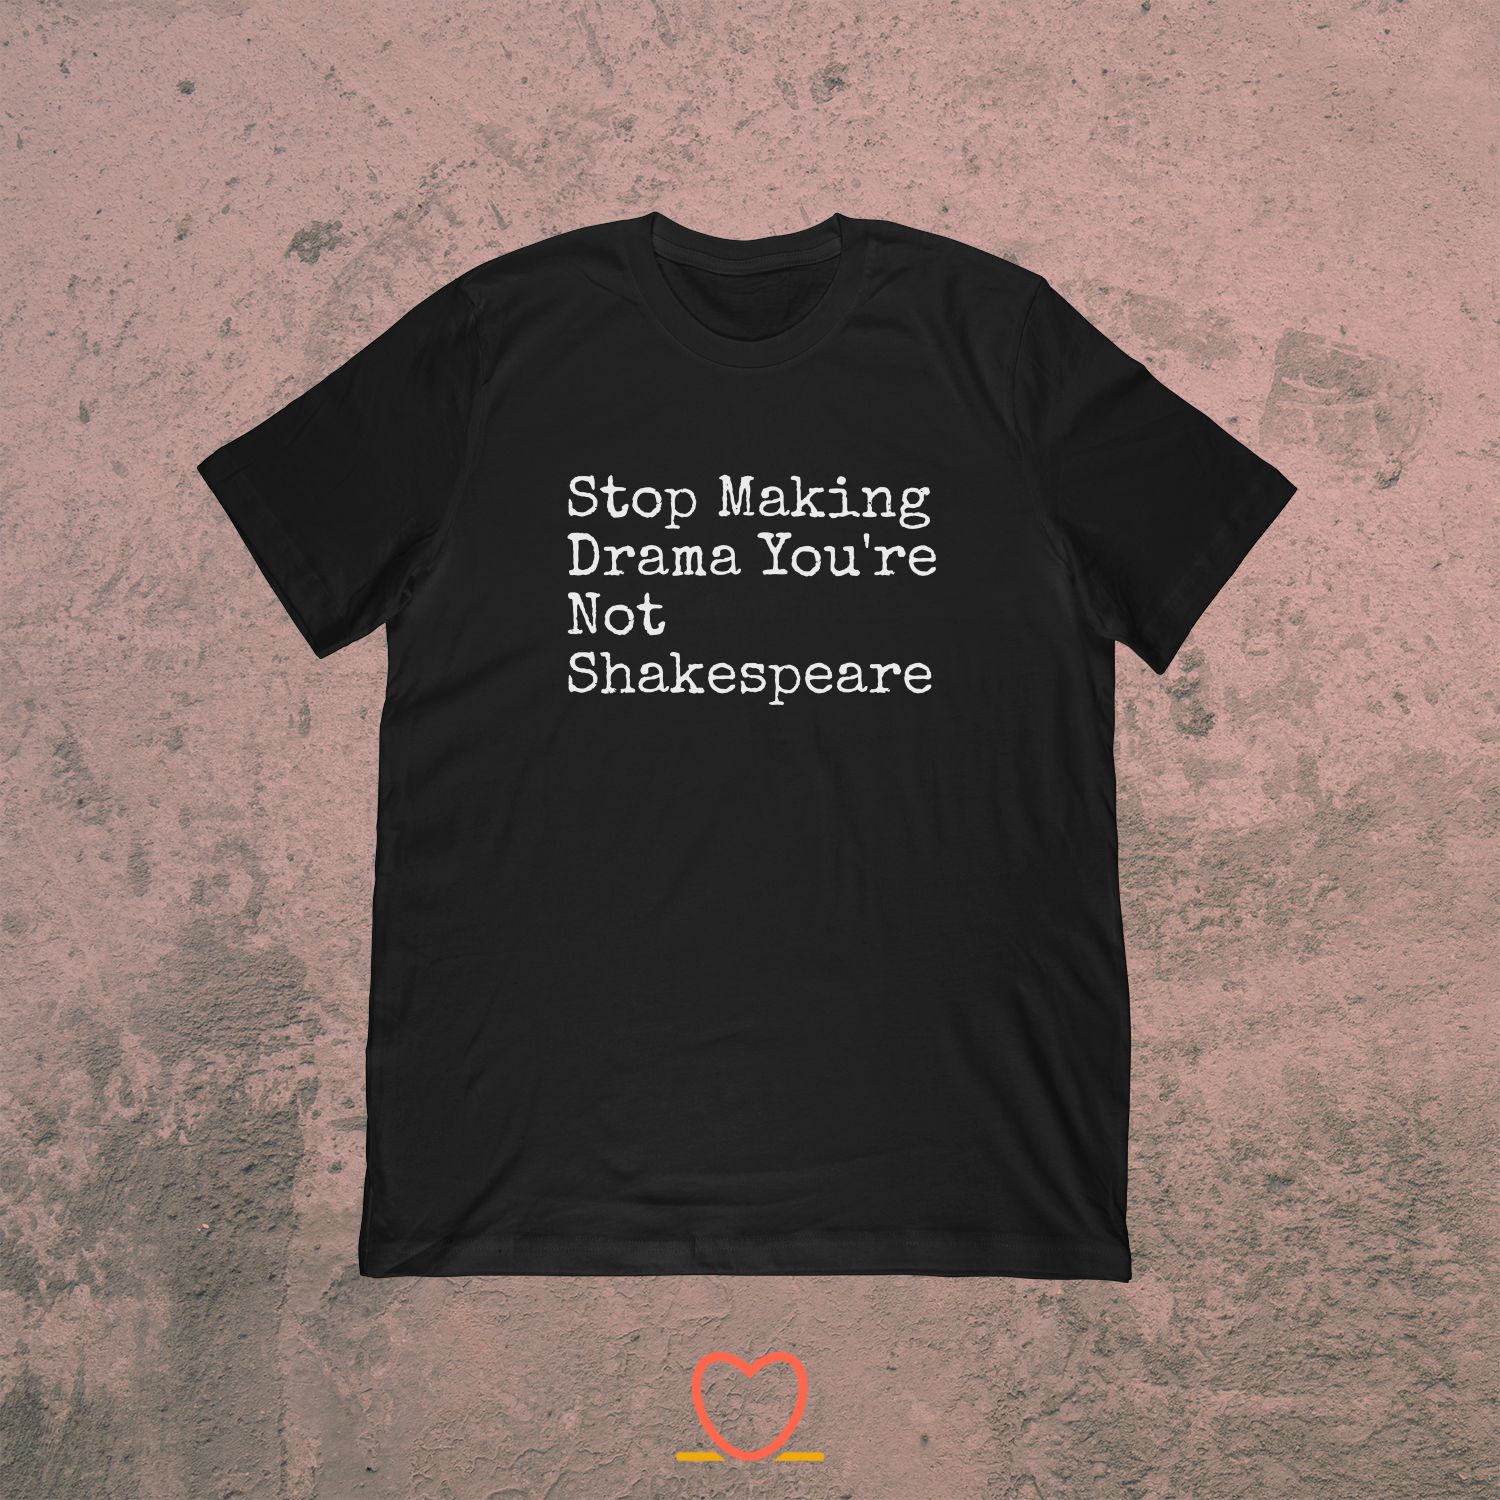 Stop Making Drama You’re Not Shakespeare – Shakespeare Tee